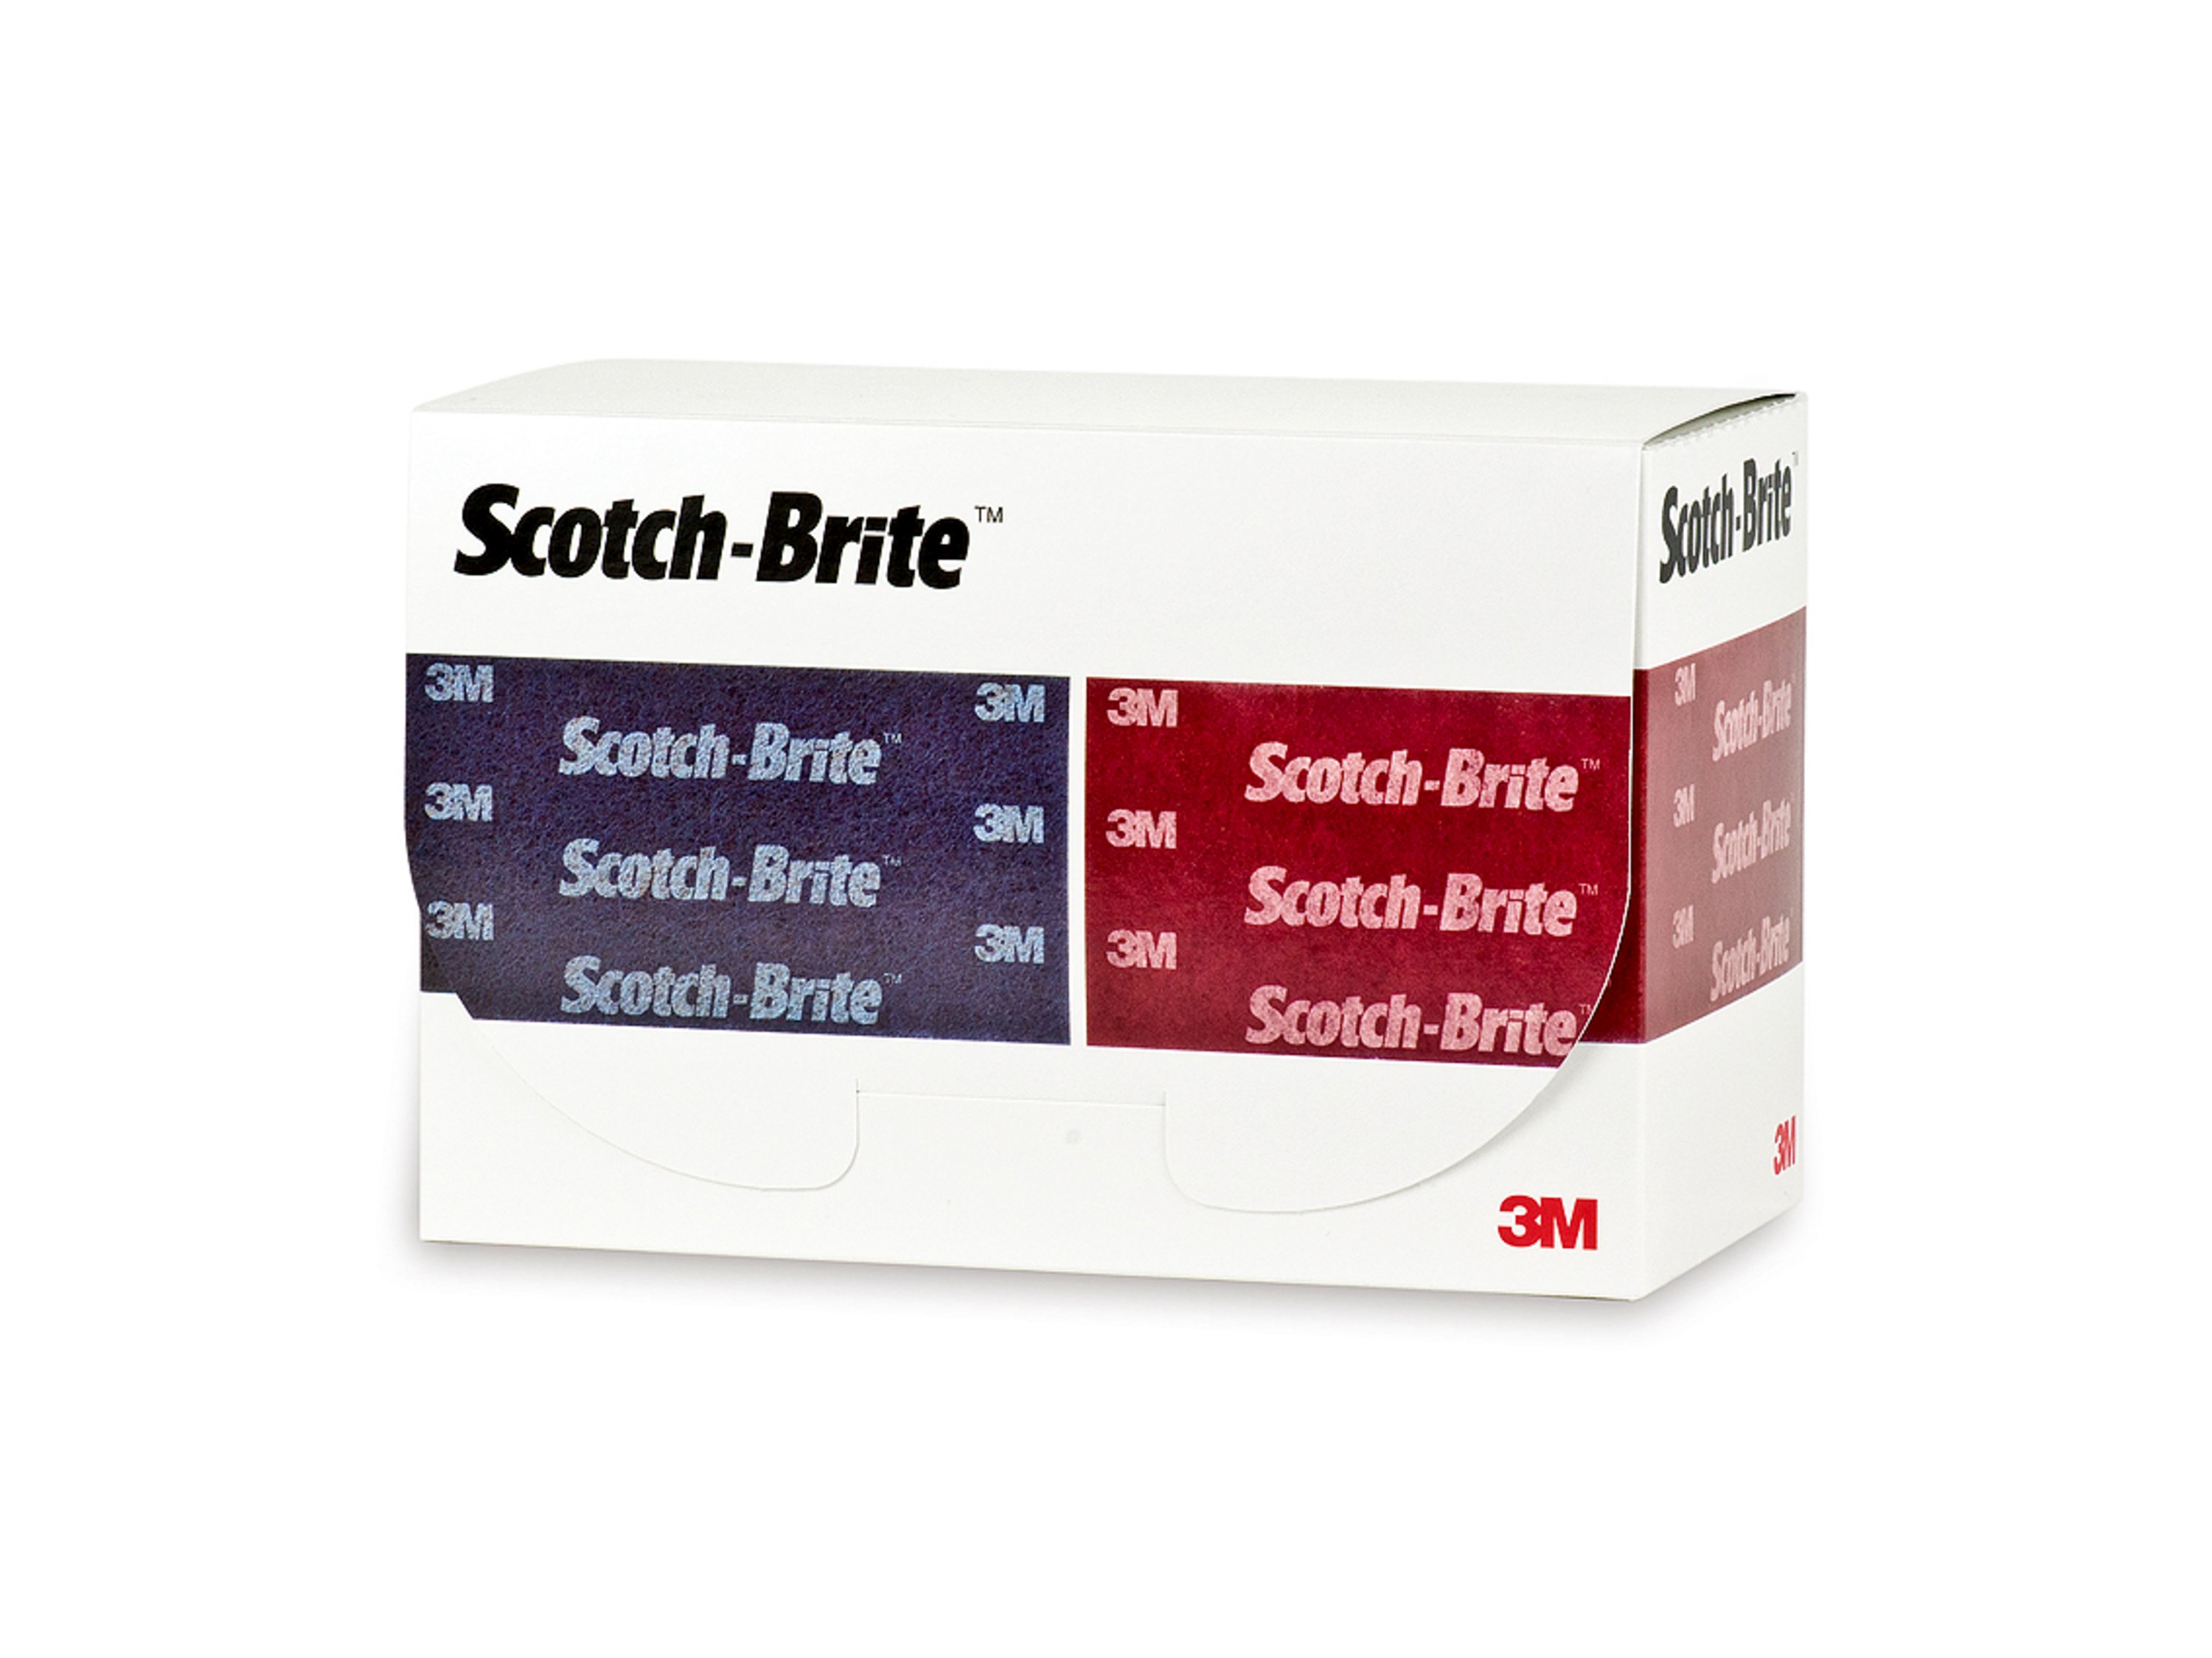 Details about   Scotch-Brite Durable Flex Hand Pad 25 Pads/Box Lot of 4 Boxes 4-1/2 in x 9 in 